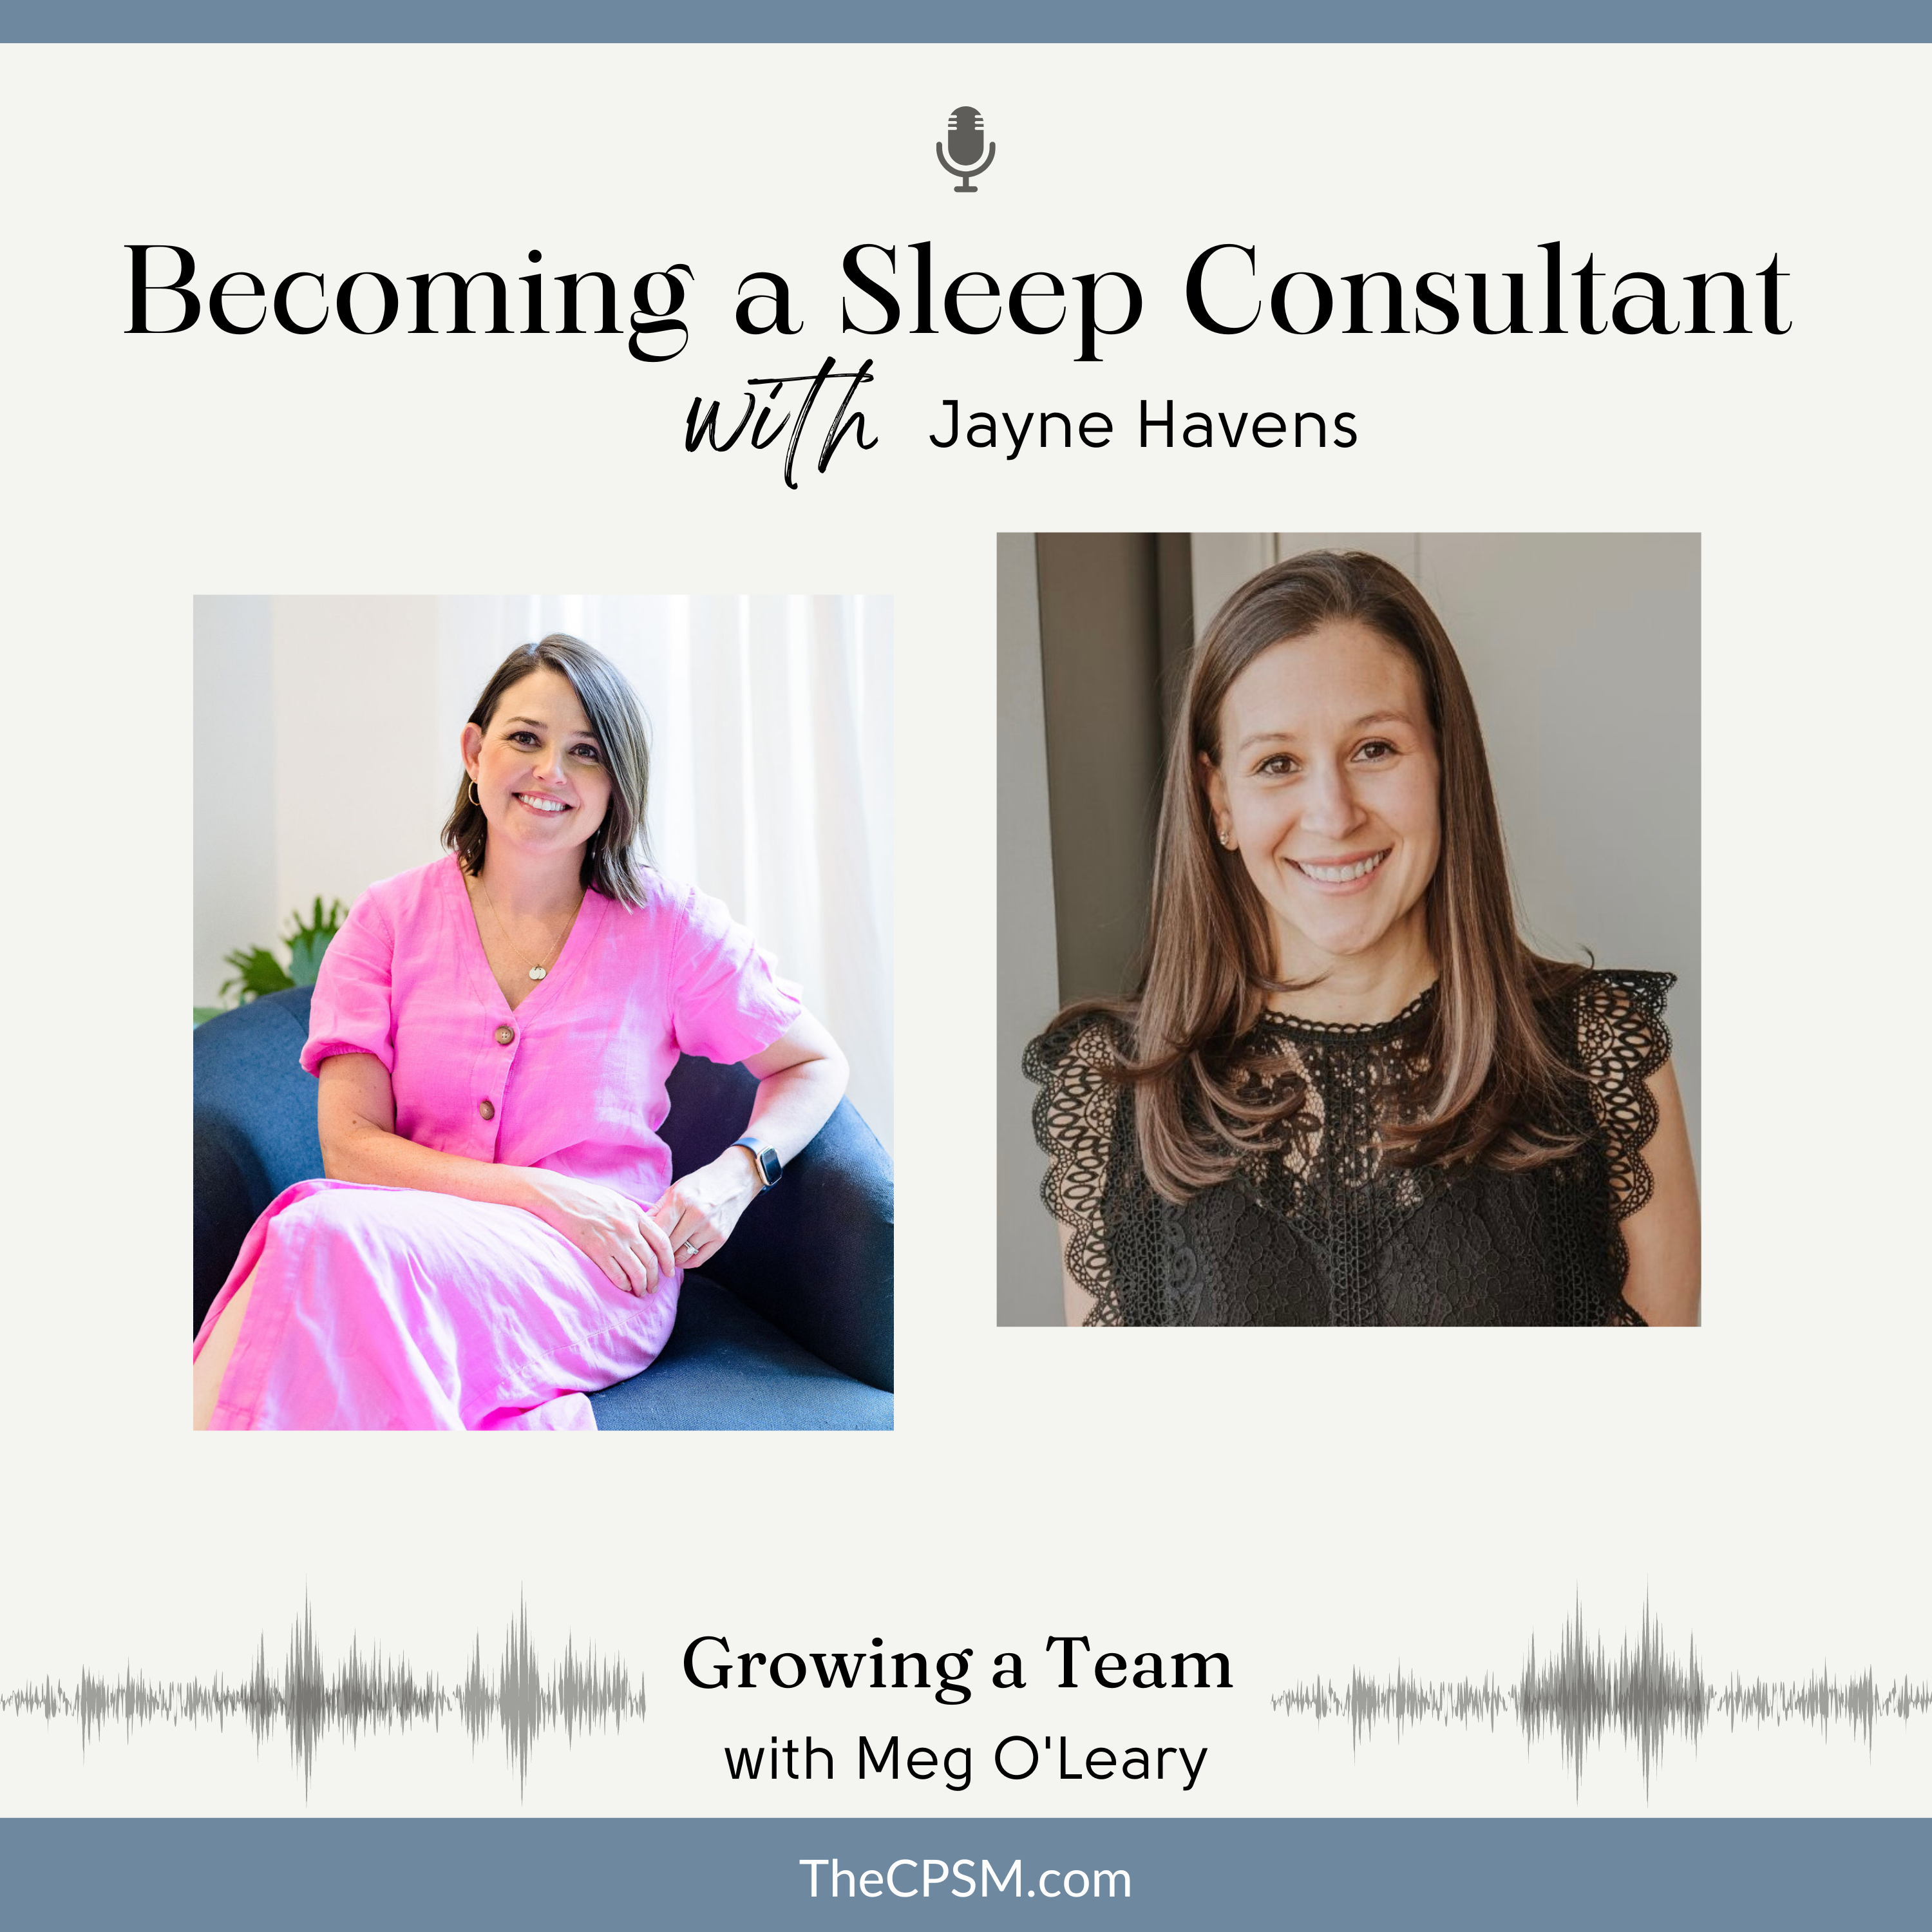 Growing a Team with Meg O'Leary